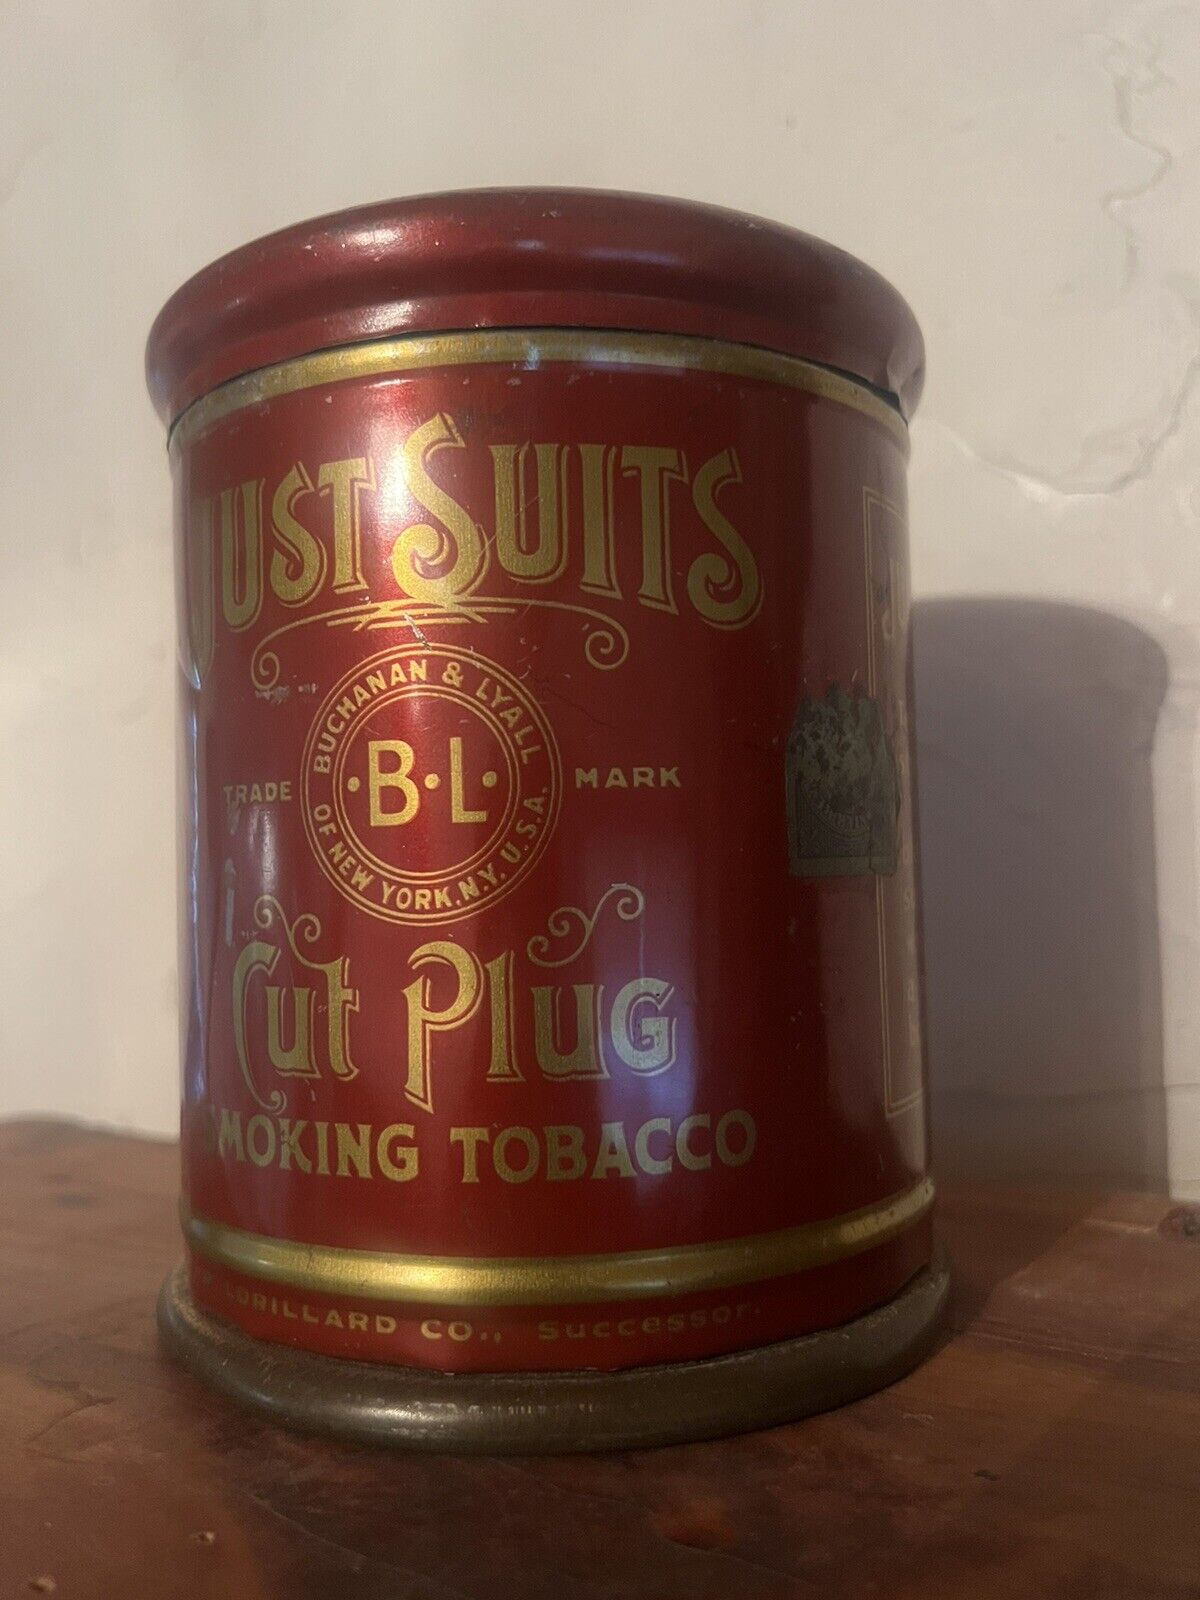 Antique Just Suits Knob Top Tobacco Tin (empty) Very Clean